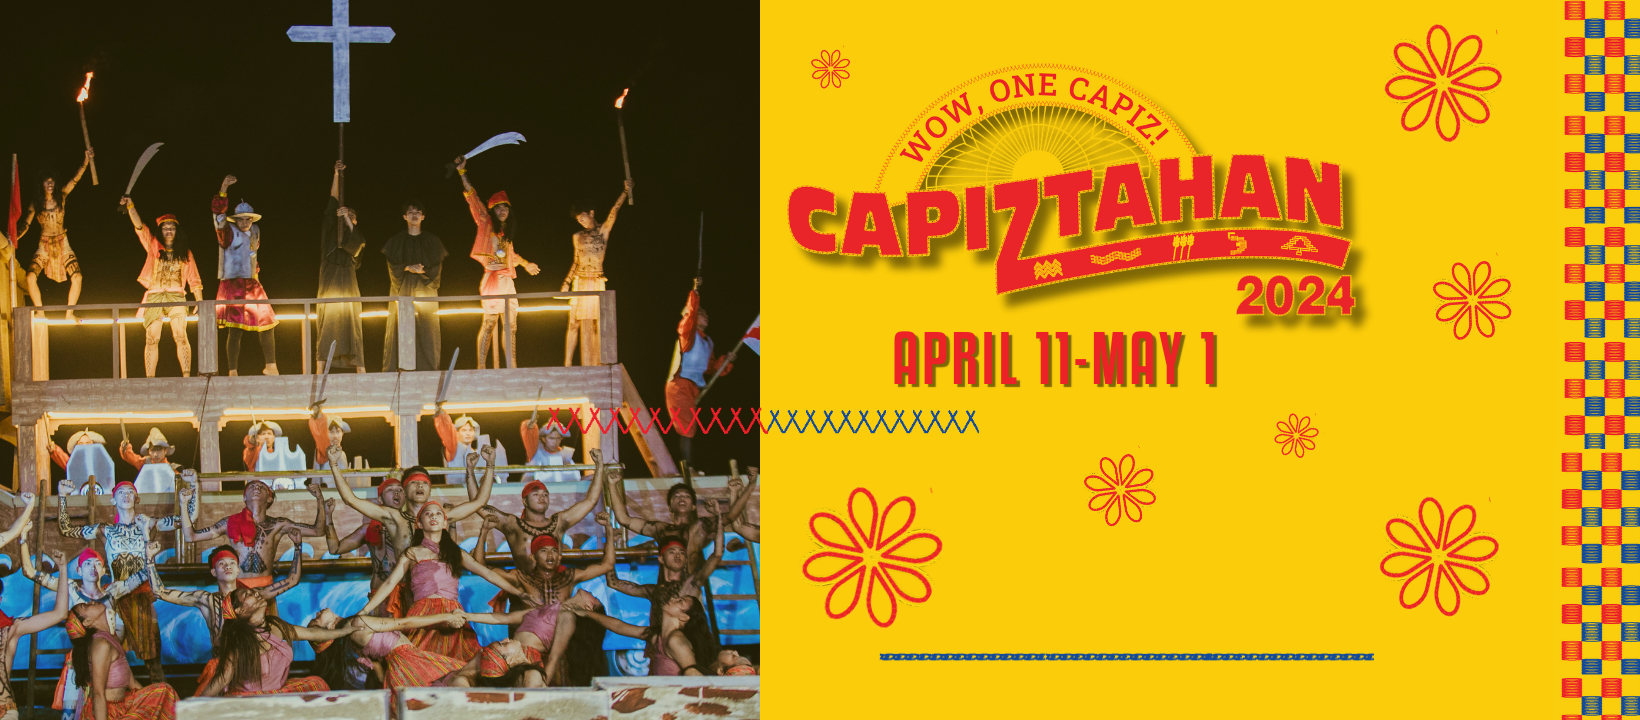 Capiztahan: Celebrating Culture and Growth in Capiz